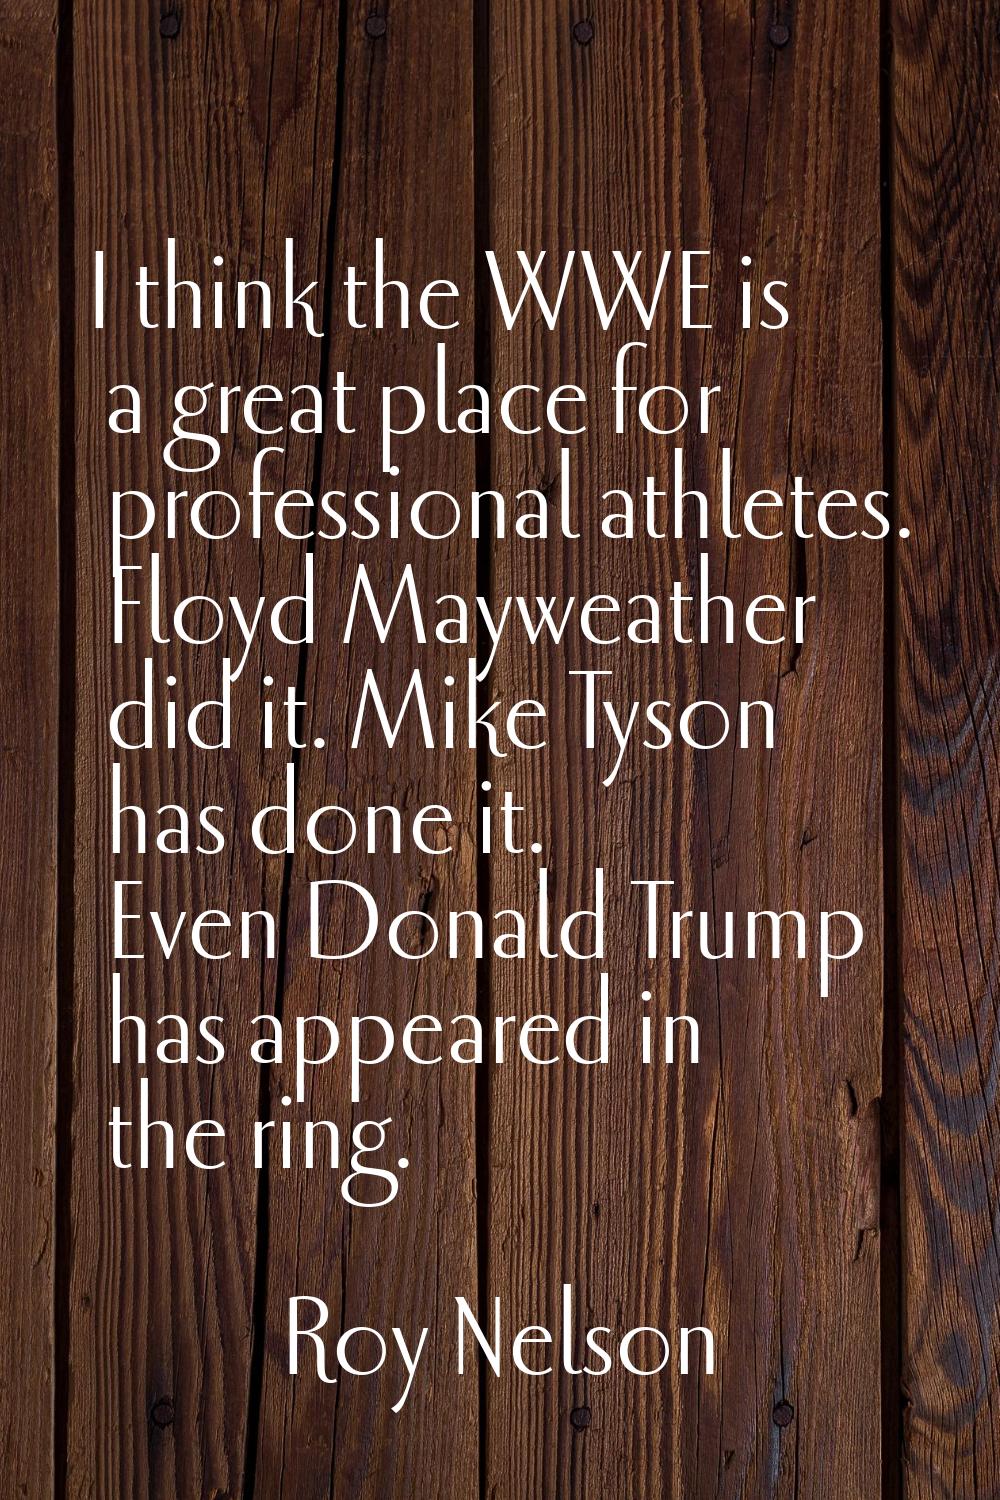 I think the WWE is a great place for professional athletes. Floyd Mayweather did it. Mike Tyson has